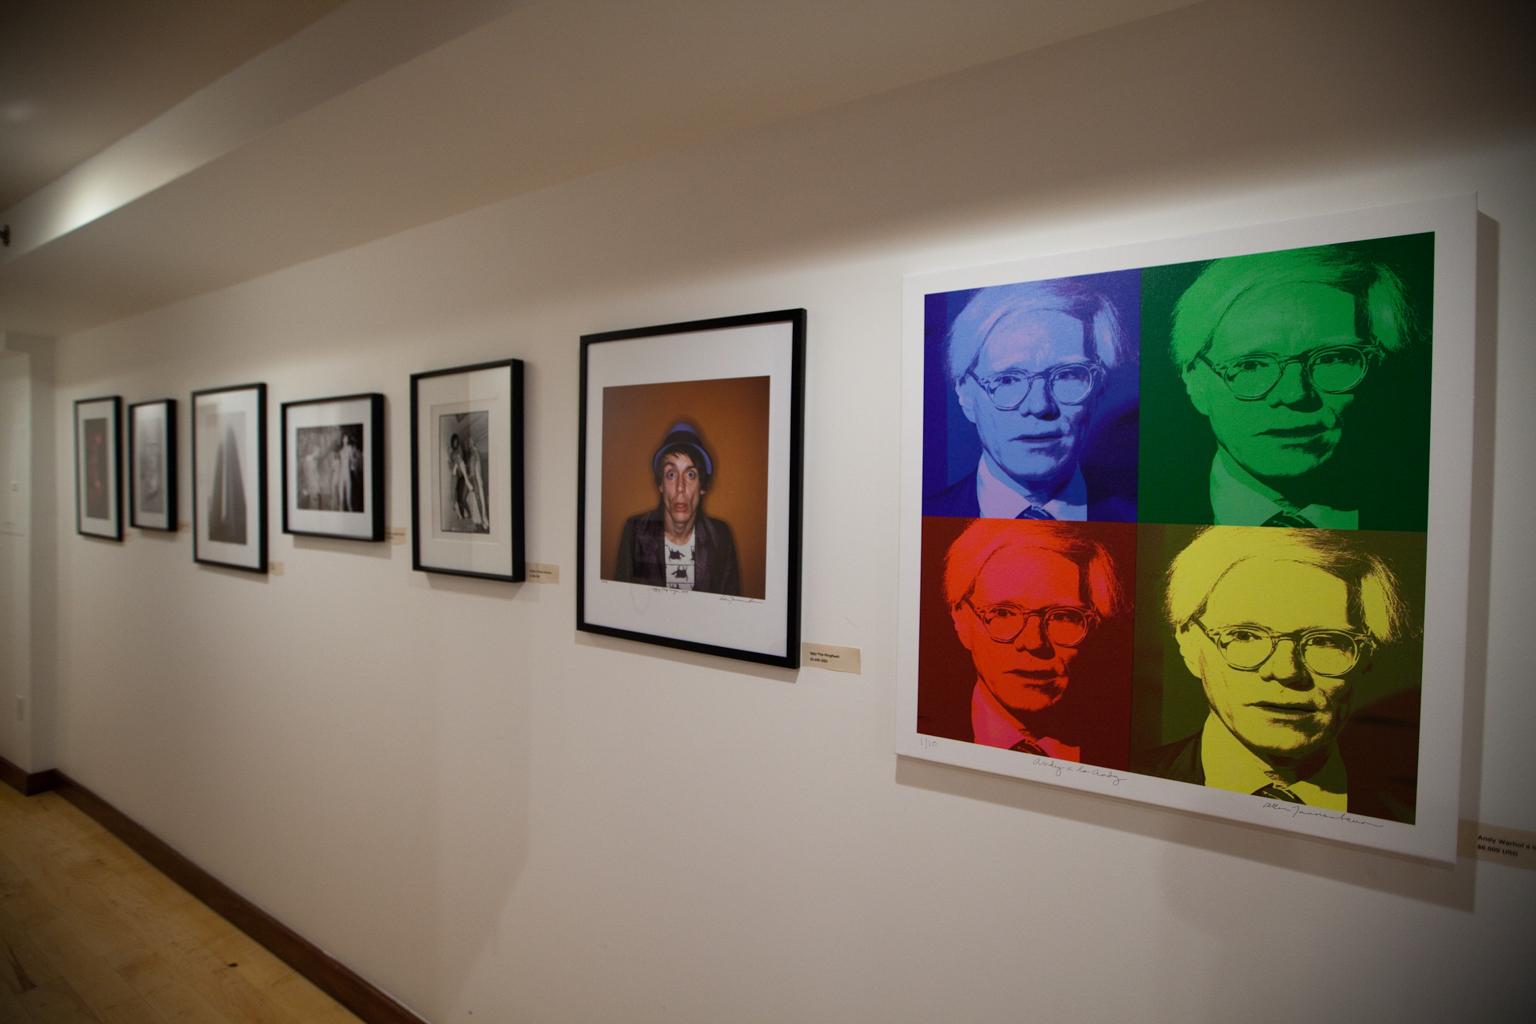 Andy Warhol a la Andy - Photo Portraits of Andy Printed on Canvas in his Style - Photograph by Allan Tannenbaum